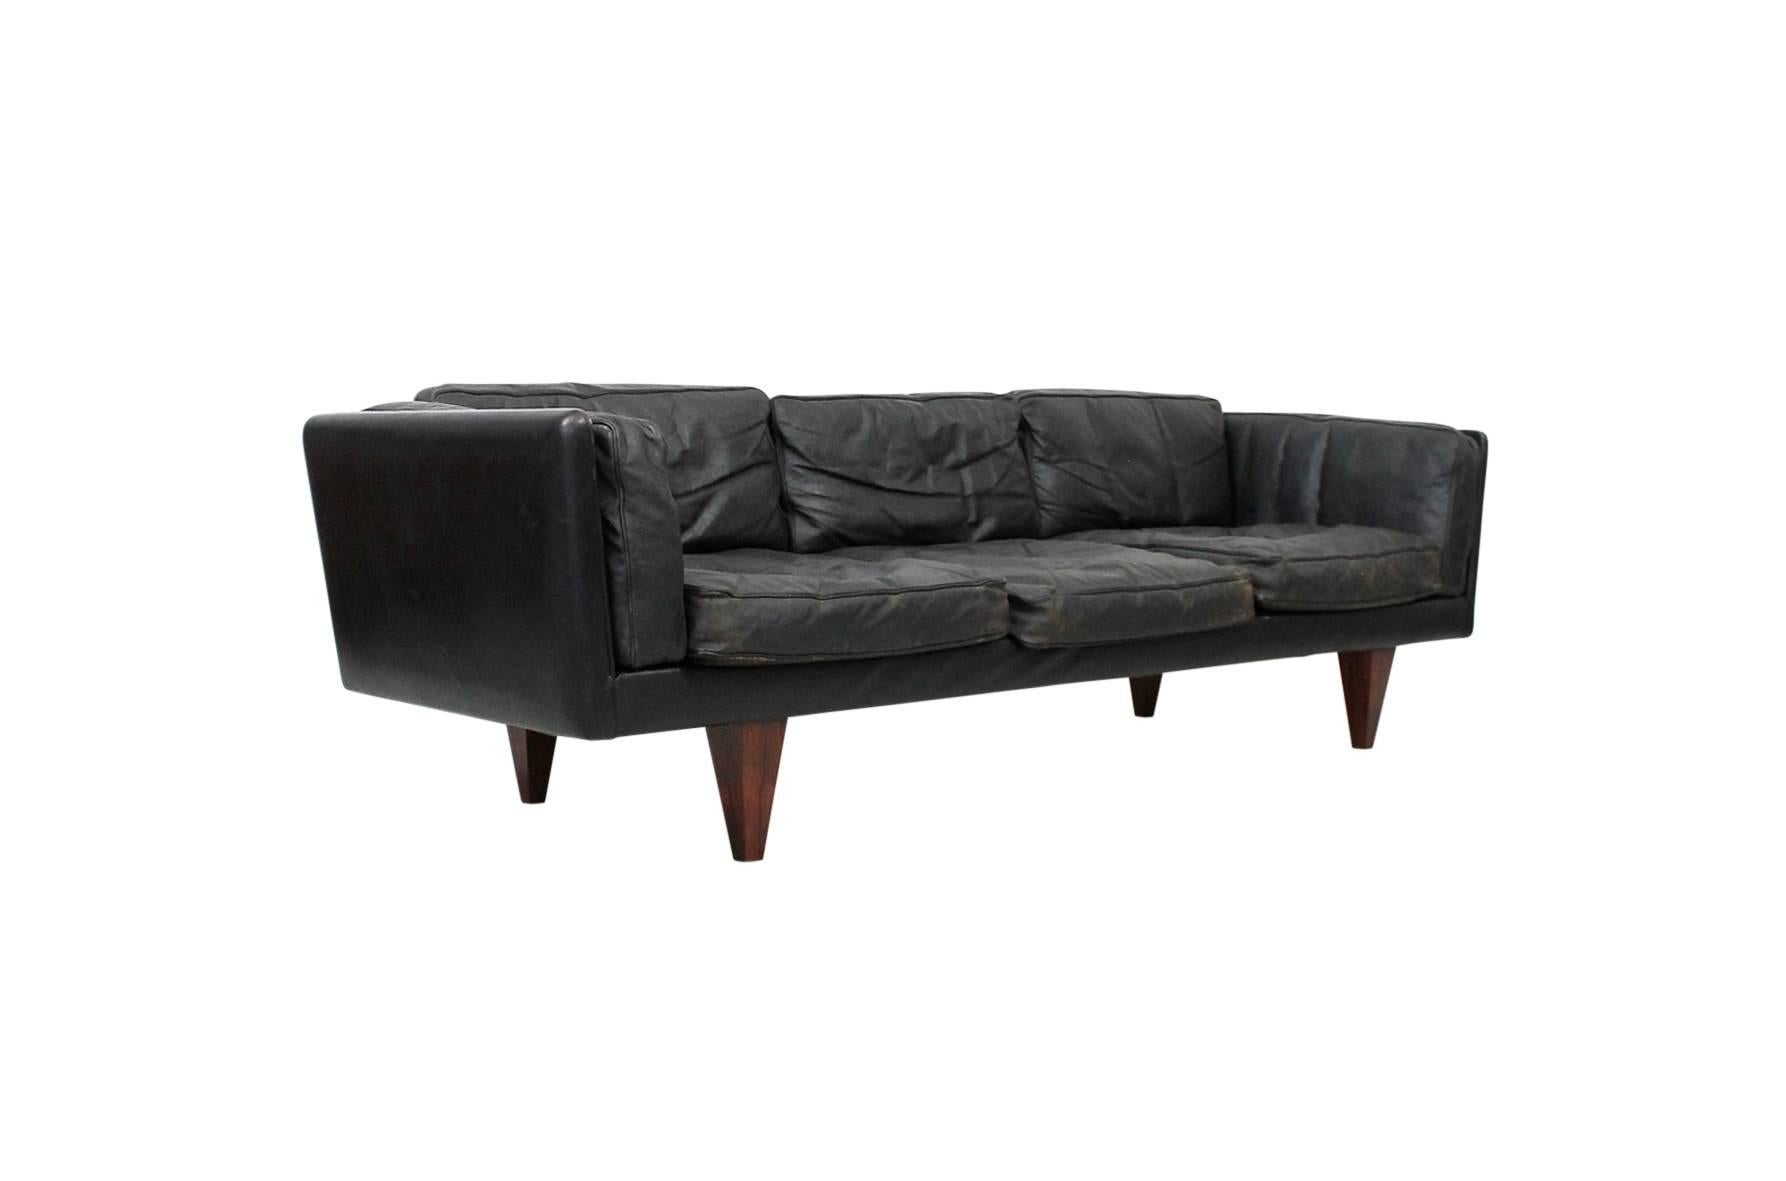 Model V11 sofa in leather and rosewood designed by Illum Wilkkelso for Holger Christiansen. This sofa features original black leather and down cushions with substantial pyramidal rosewood legs.